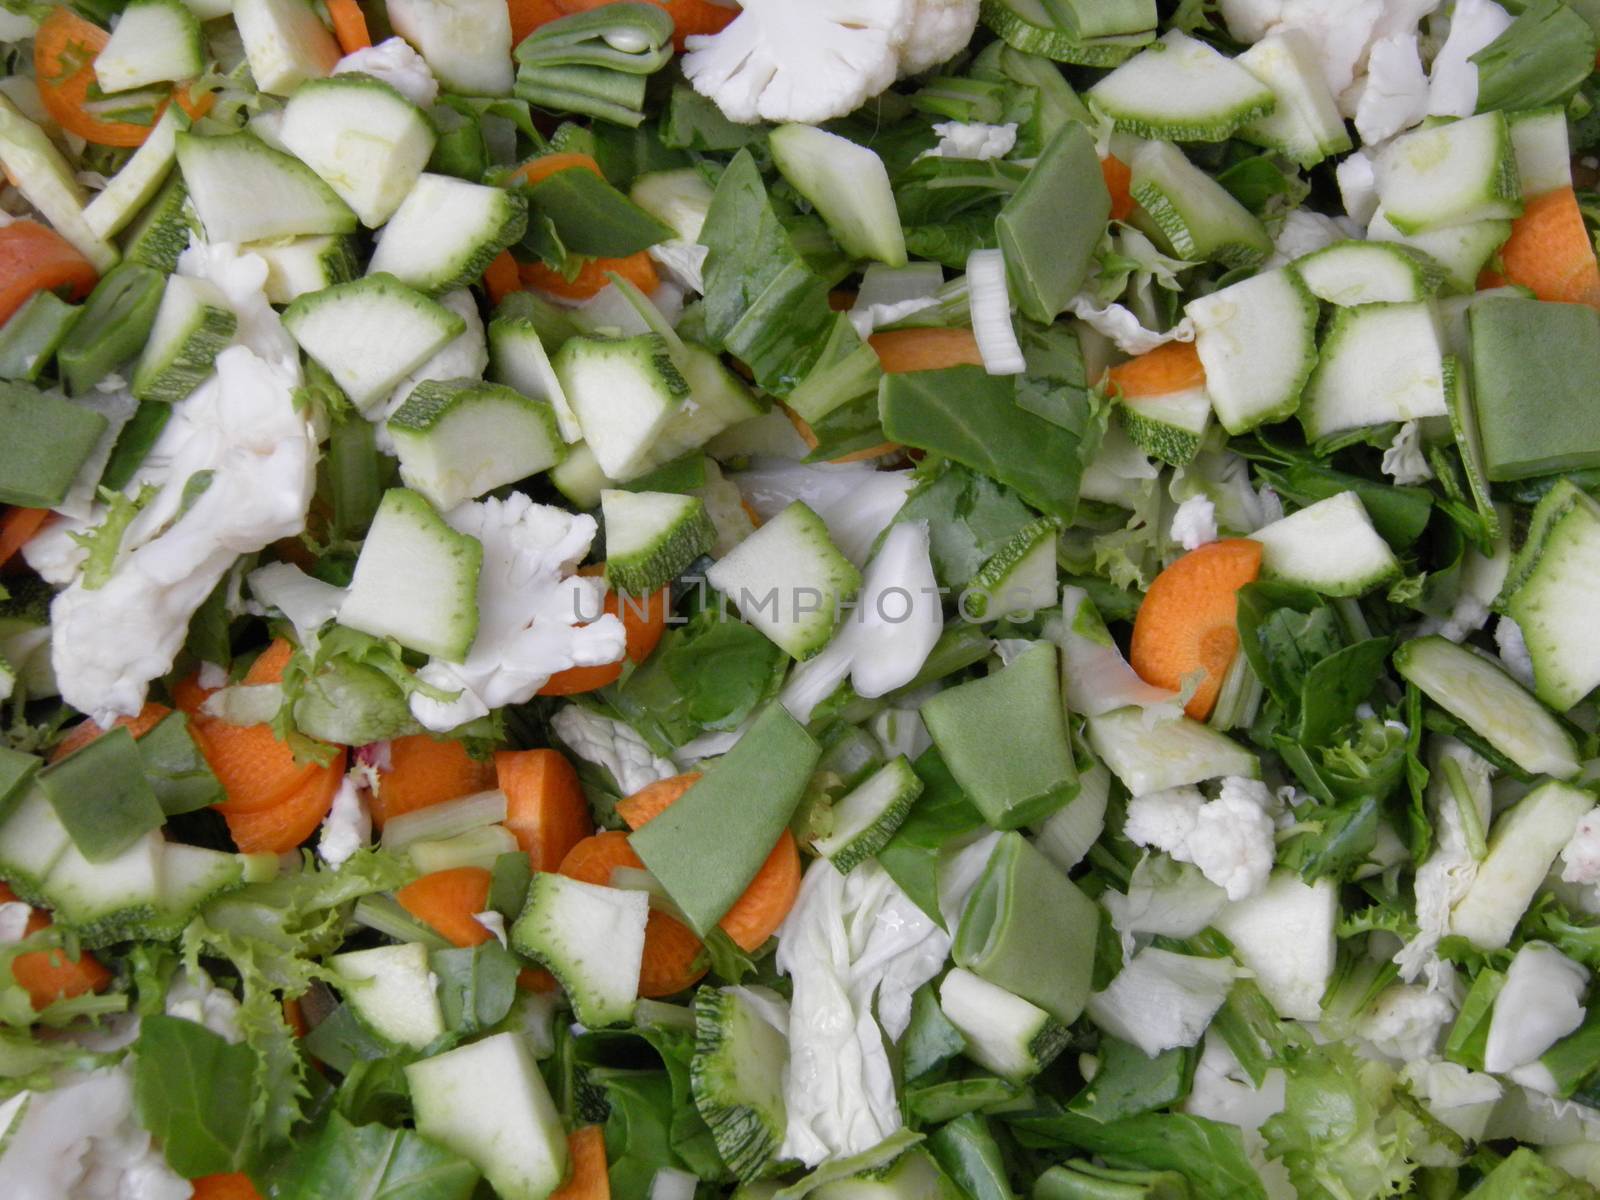 raw minestrone soup ingredients useful as backgroound